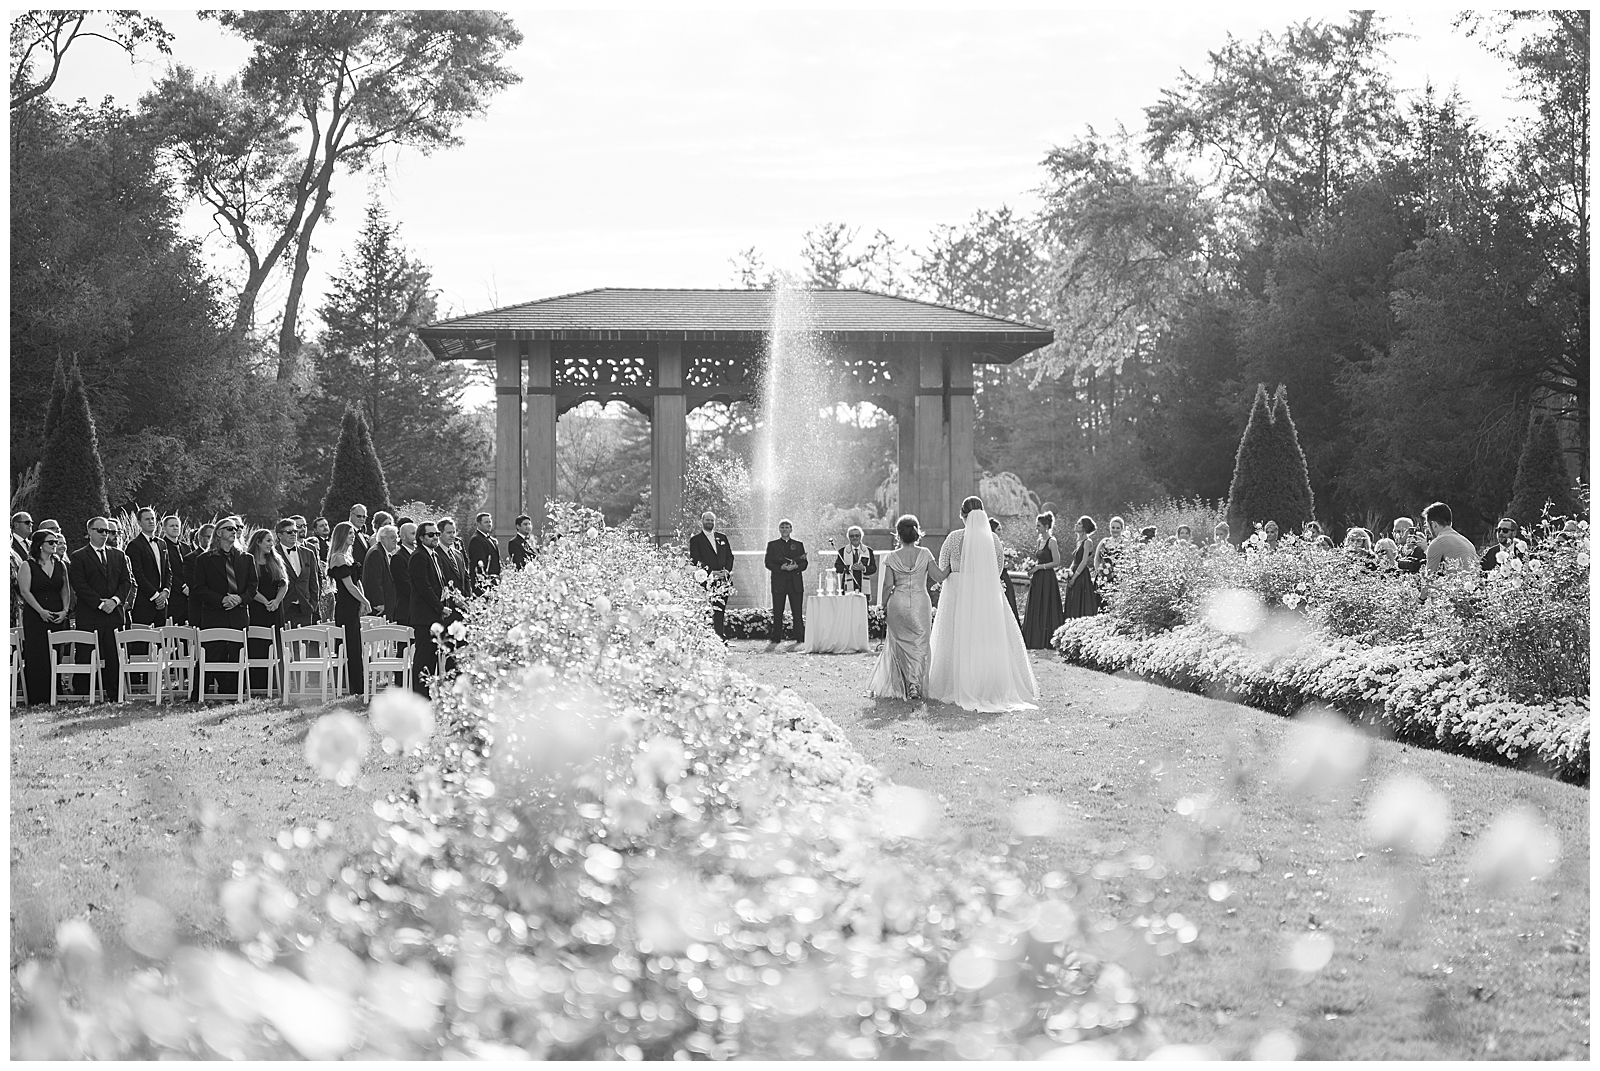 Wedding ceremony at The Armour House at Lake Forest Academy